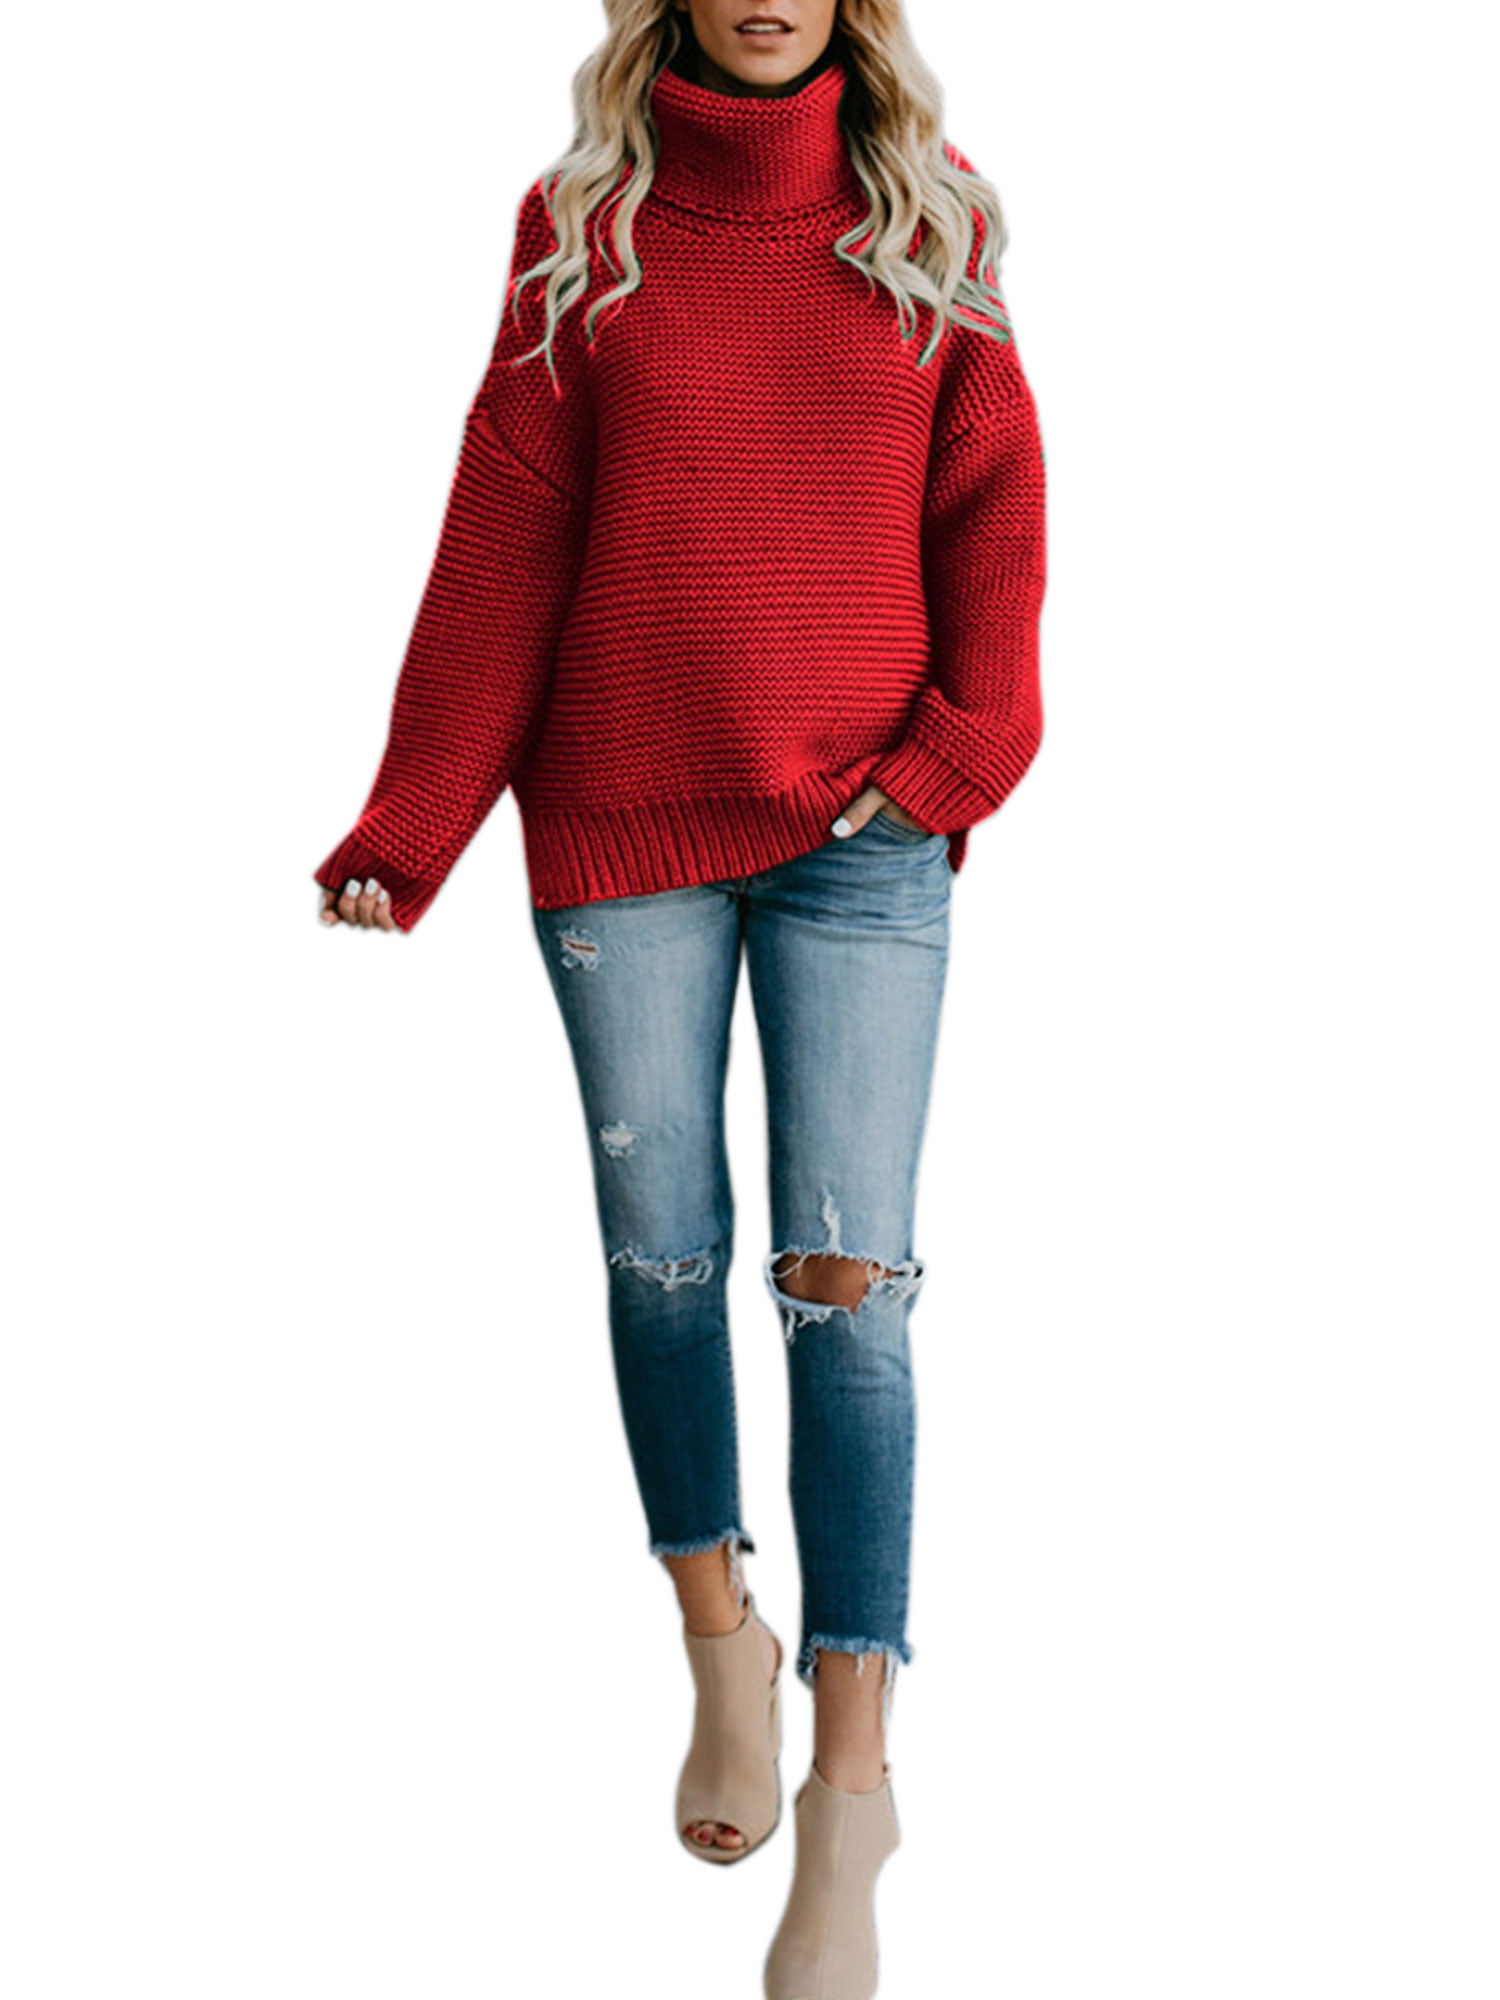 Women Turtleneck Knitted Sweater Warm Stretch Pullover Jumper Tops Fall/Winter D